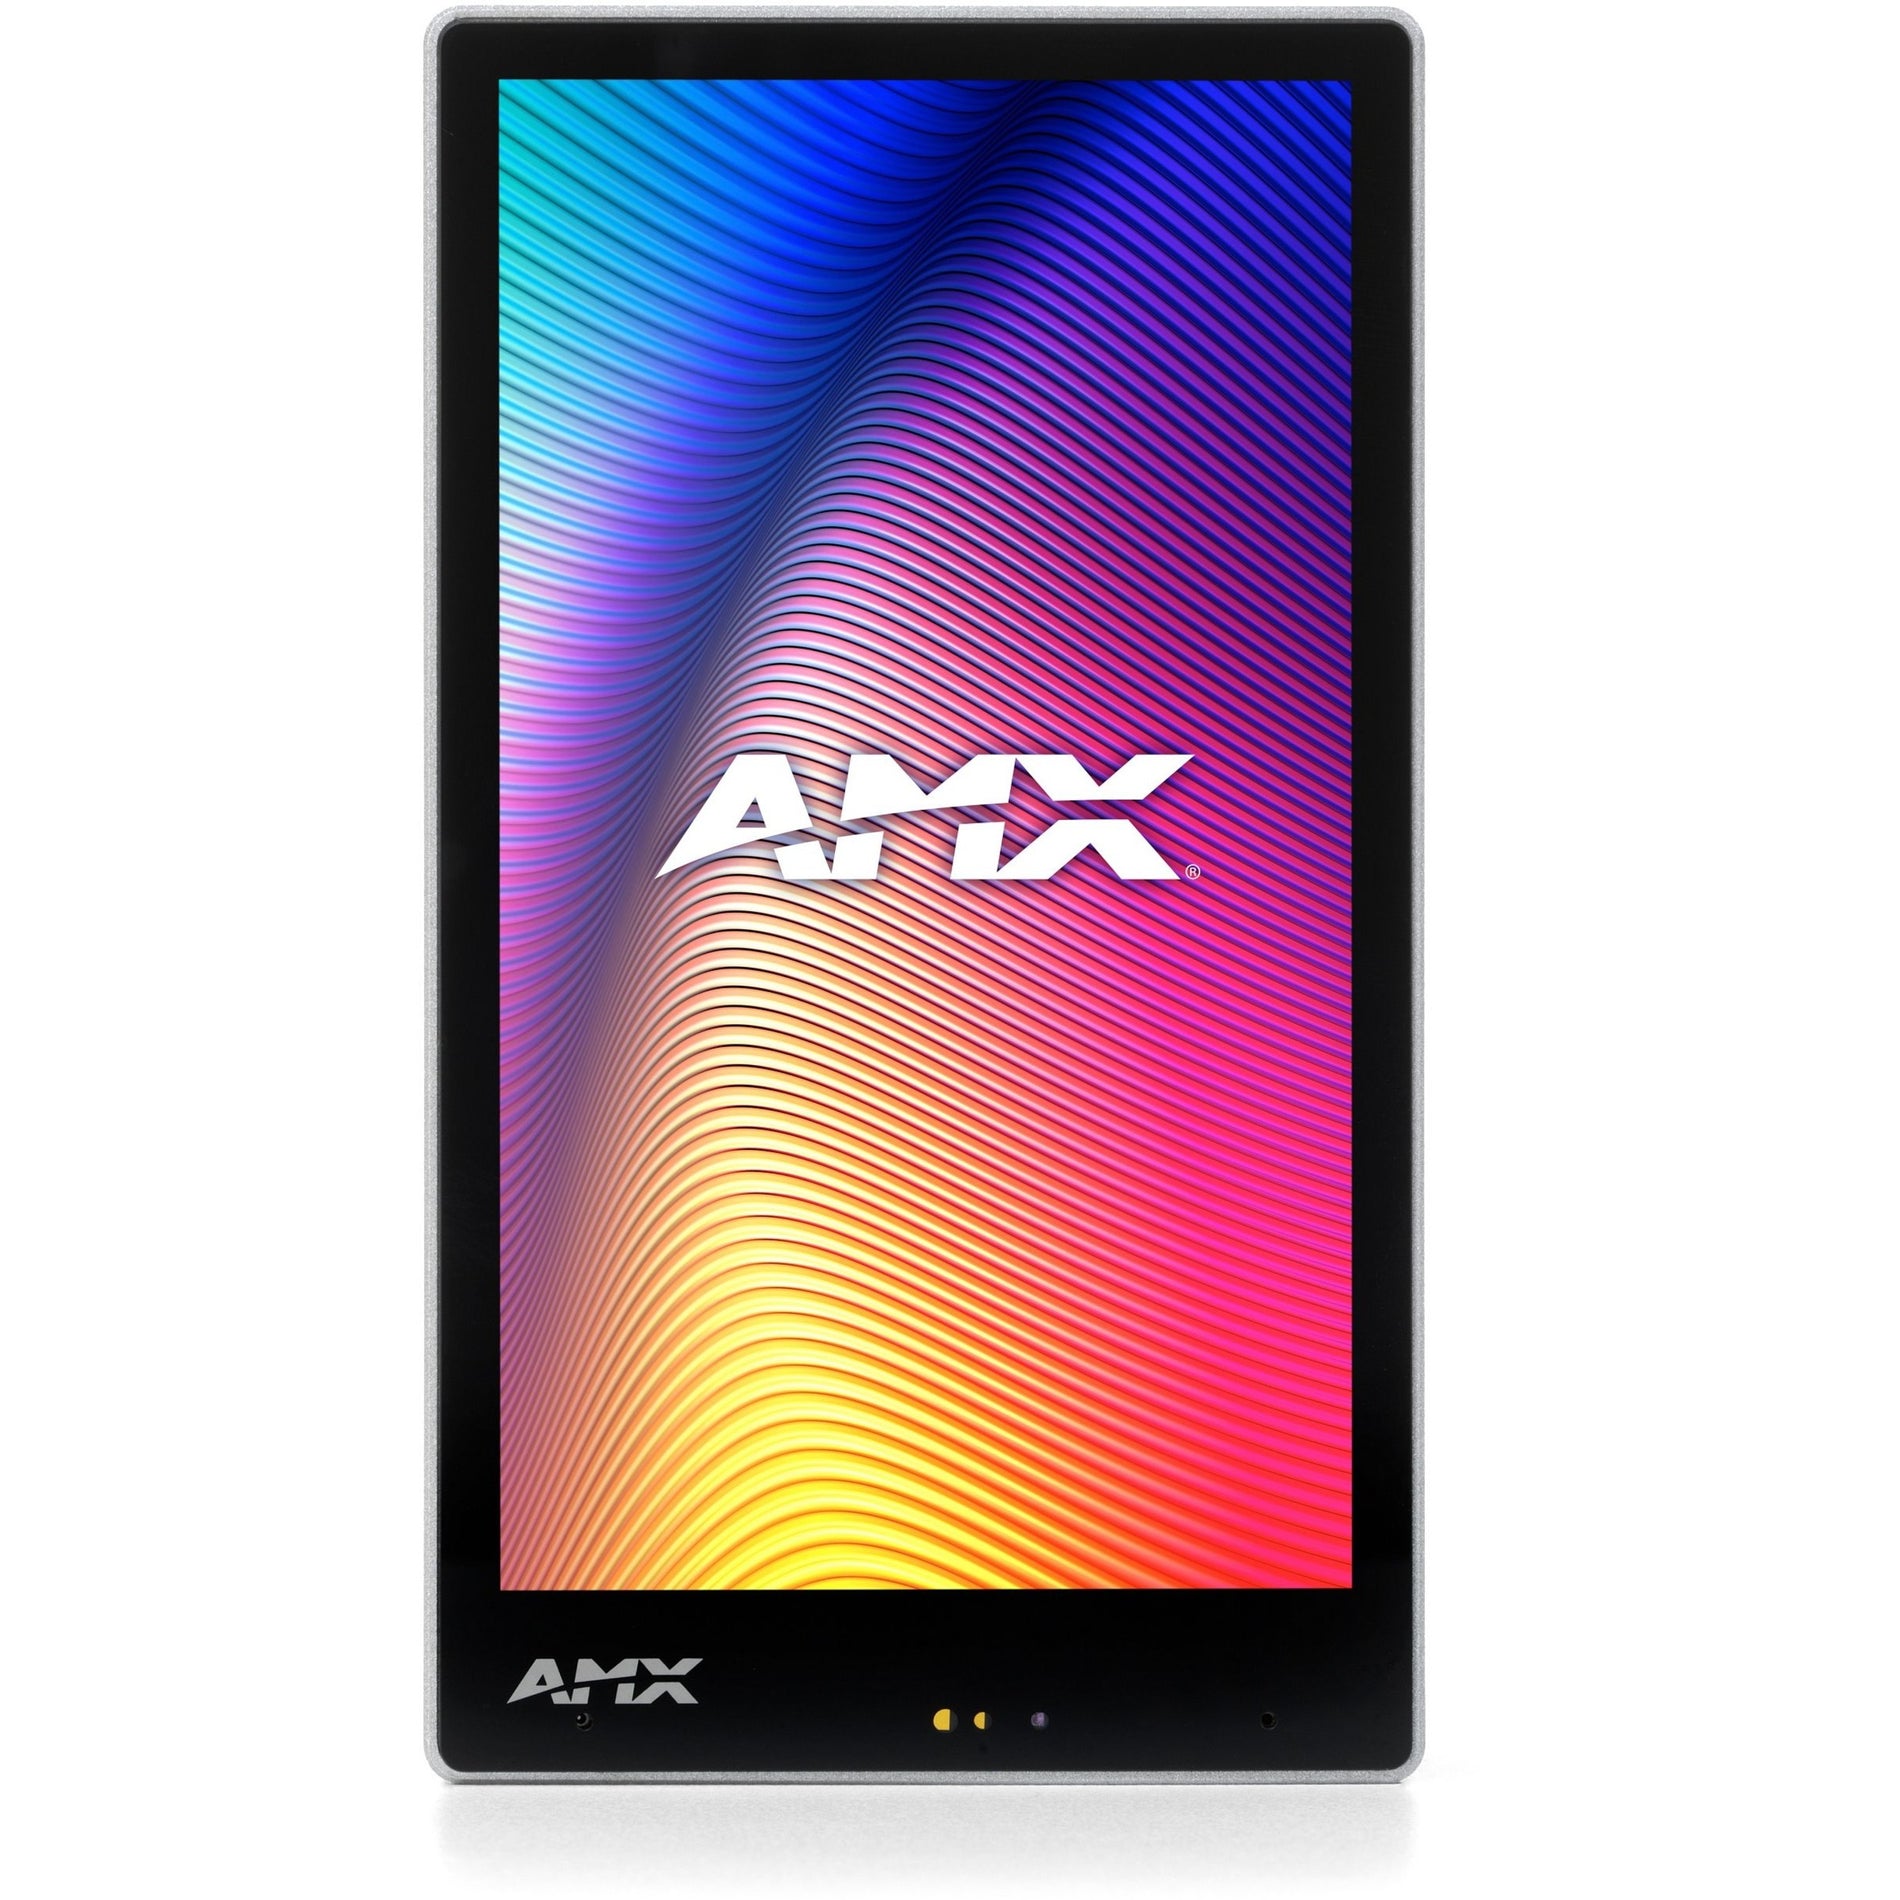 AMX AMX-UTP0501 5.5" UItra-Slim Wall-Mount Touch Panel, Professional-Grade A/V Control Panel